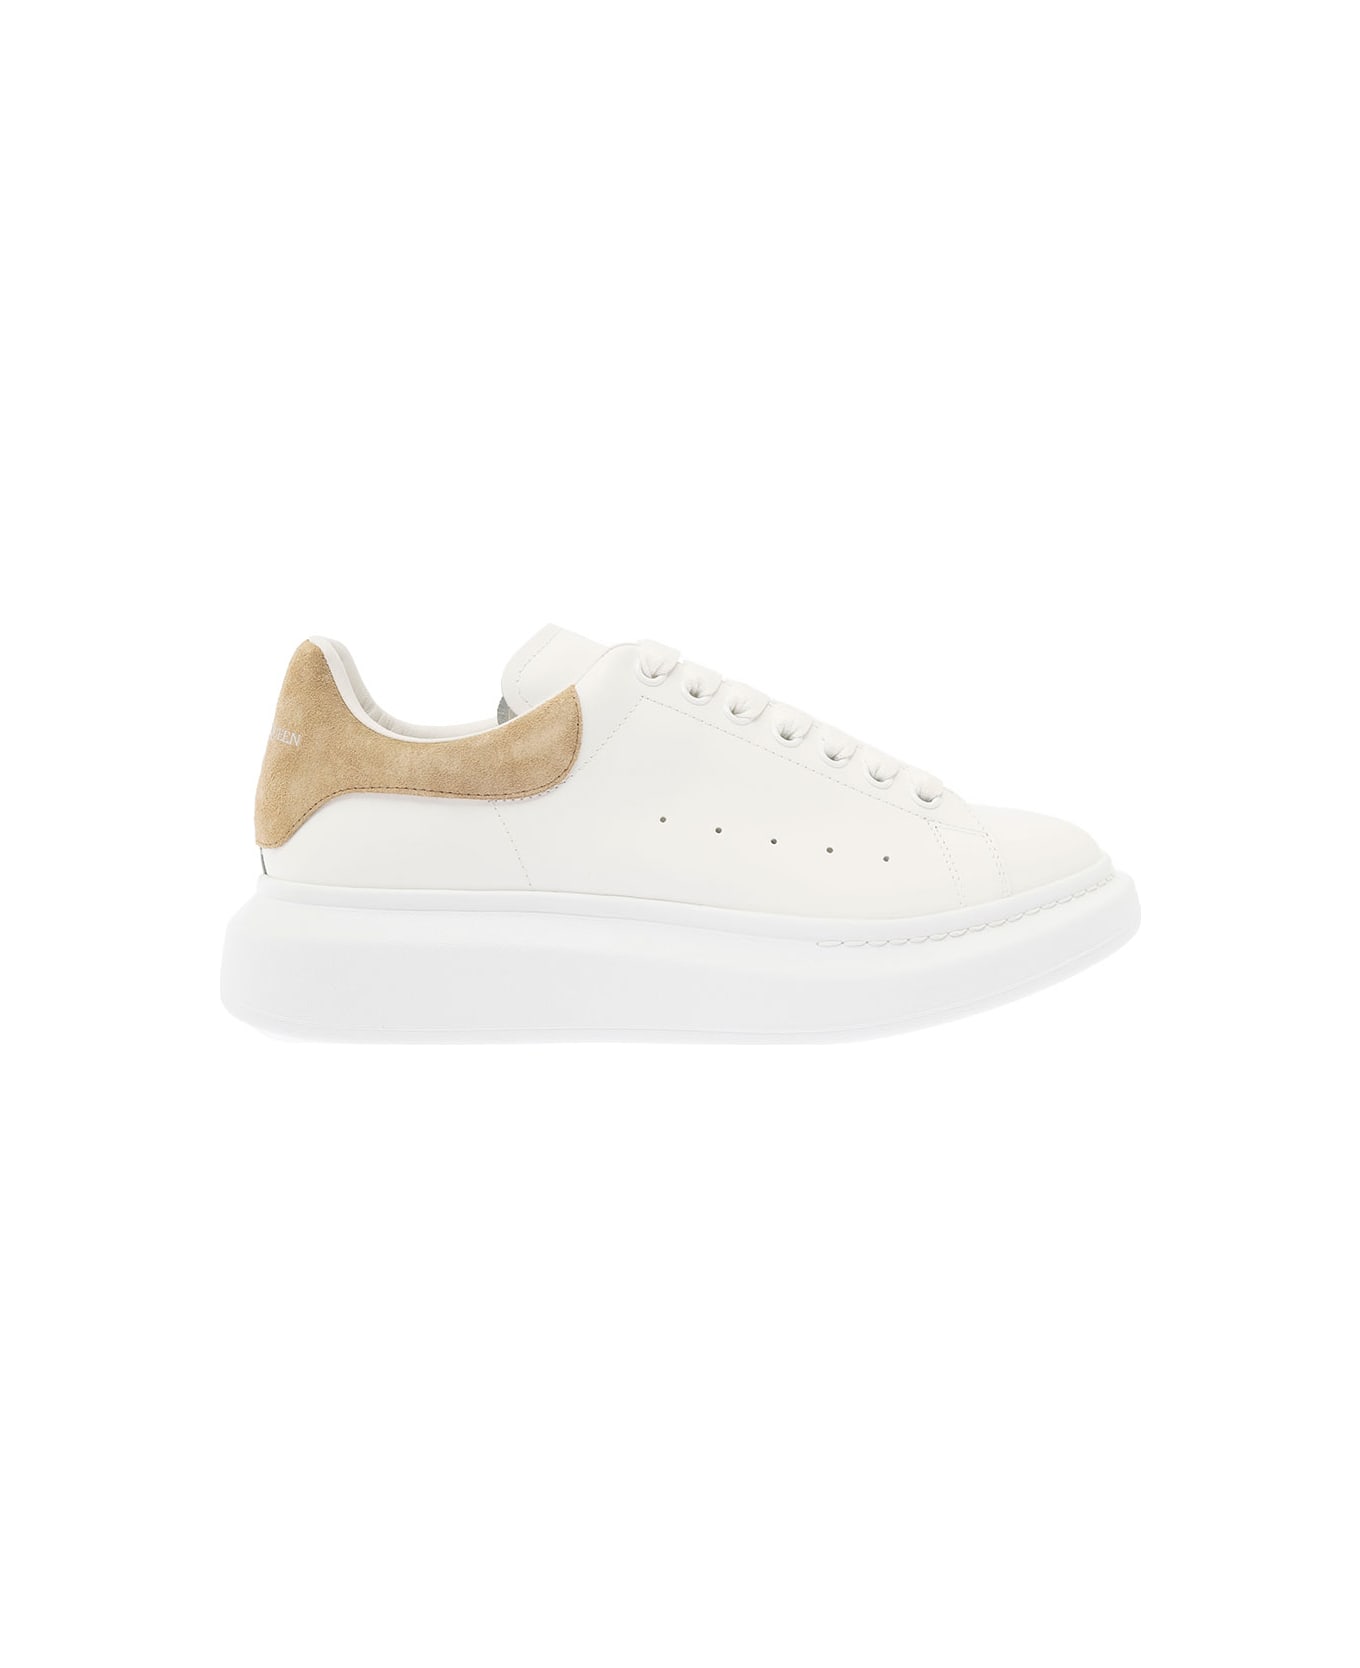 Alexander McQueen White Low-top Sneakers With Chunky Sole And Contrasting Heel Tab In Leather Man - White